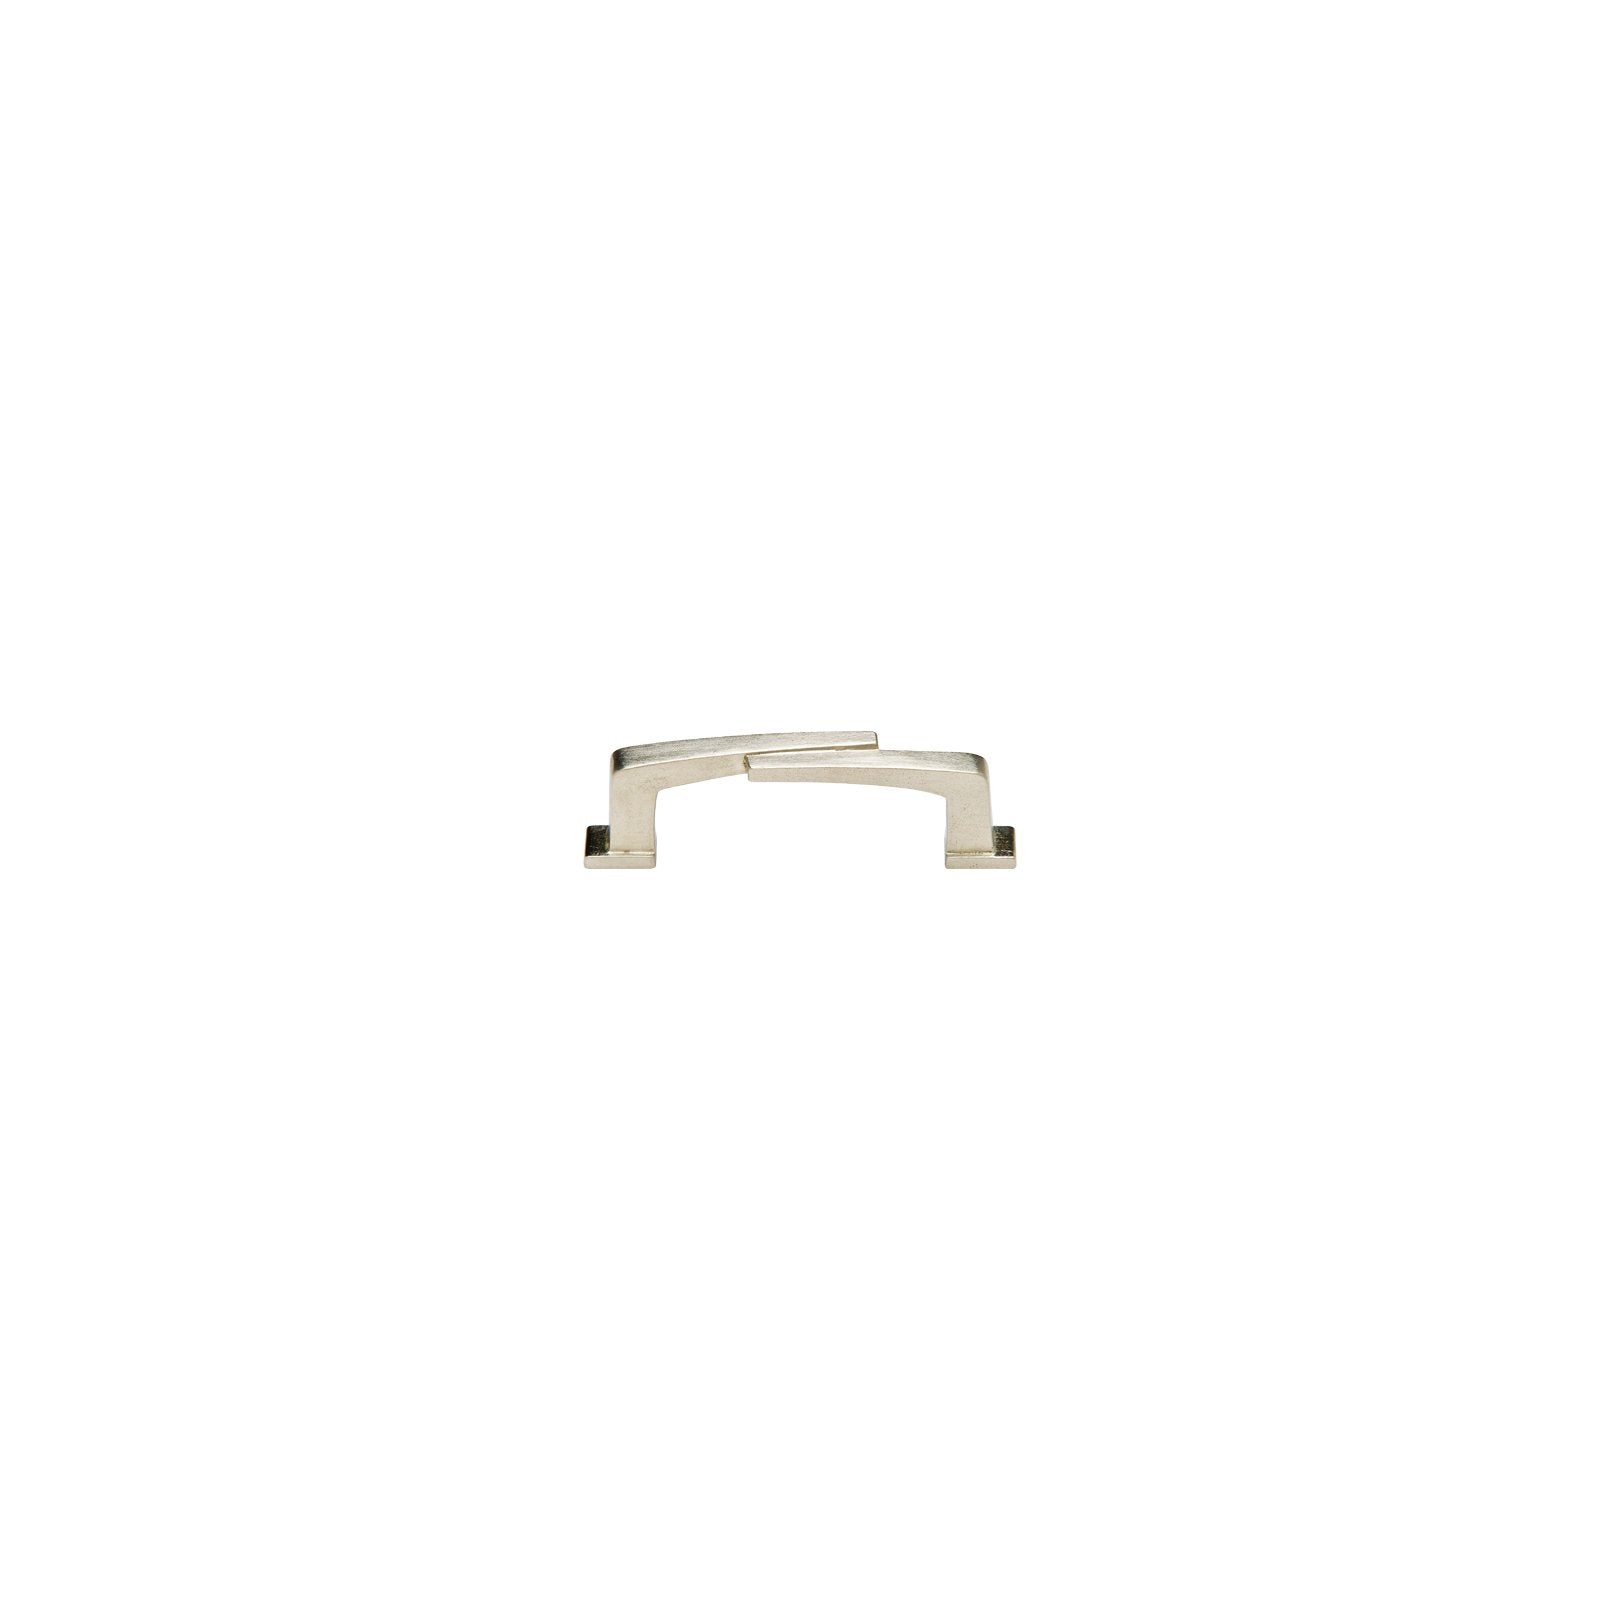 Rocky Mountain Hardware CK20210 - 3 1/2" C-to-C Shift Cabinet Pull